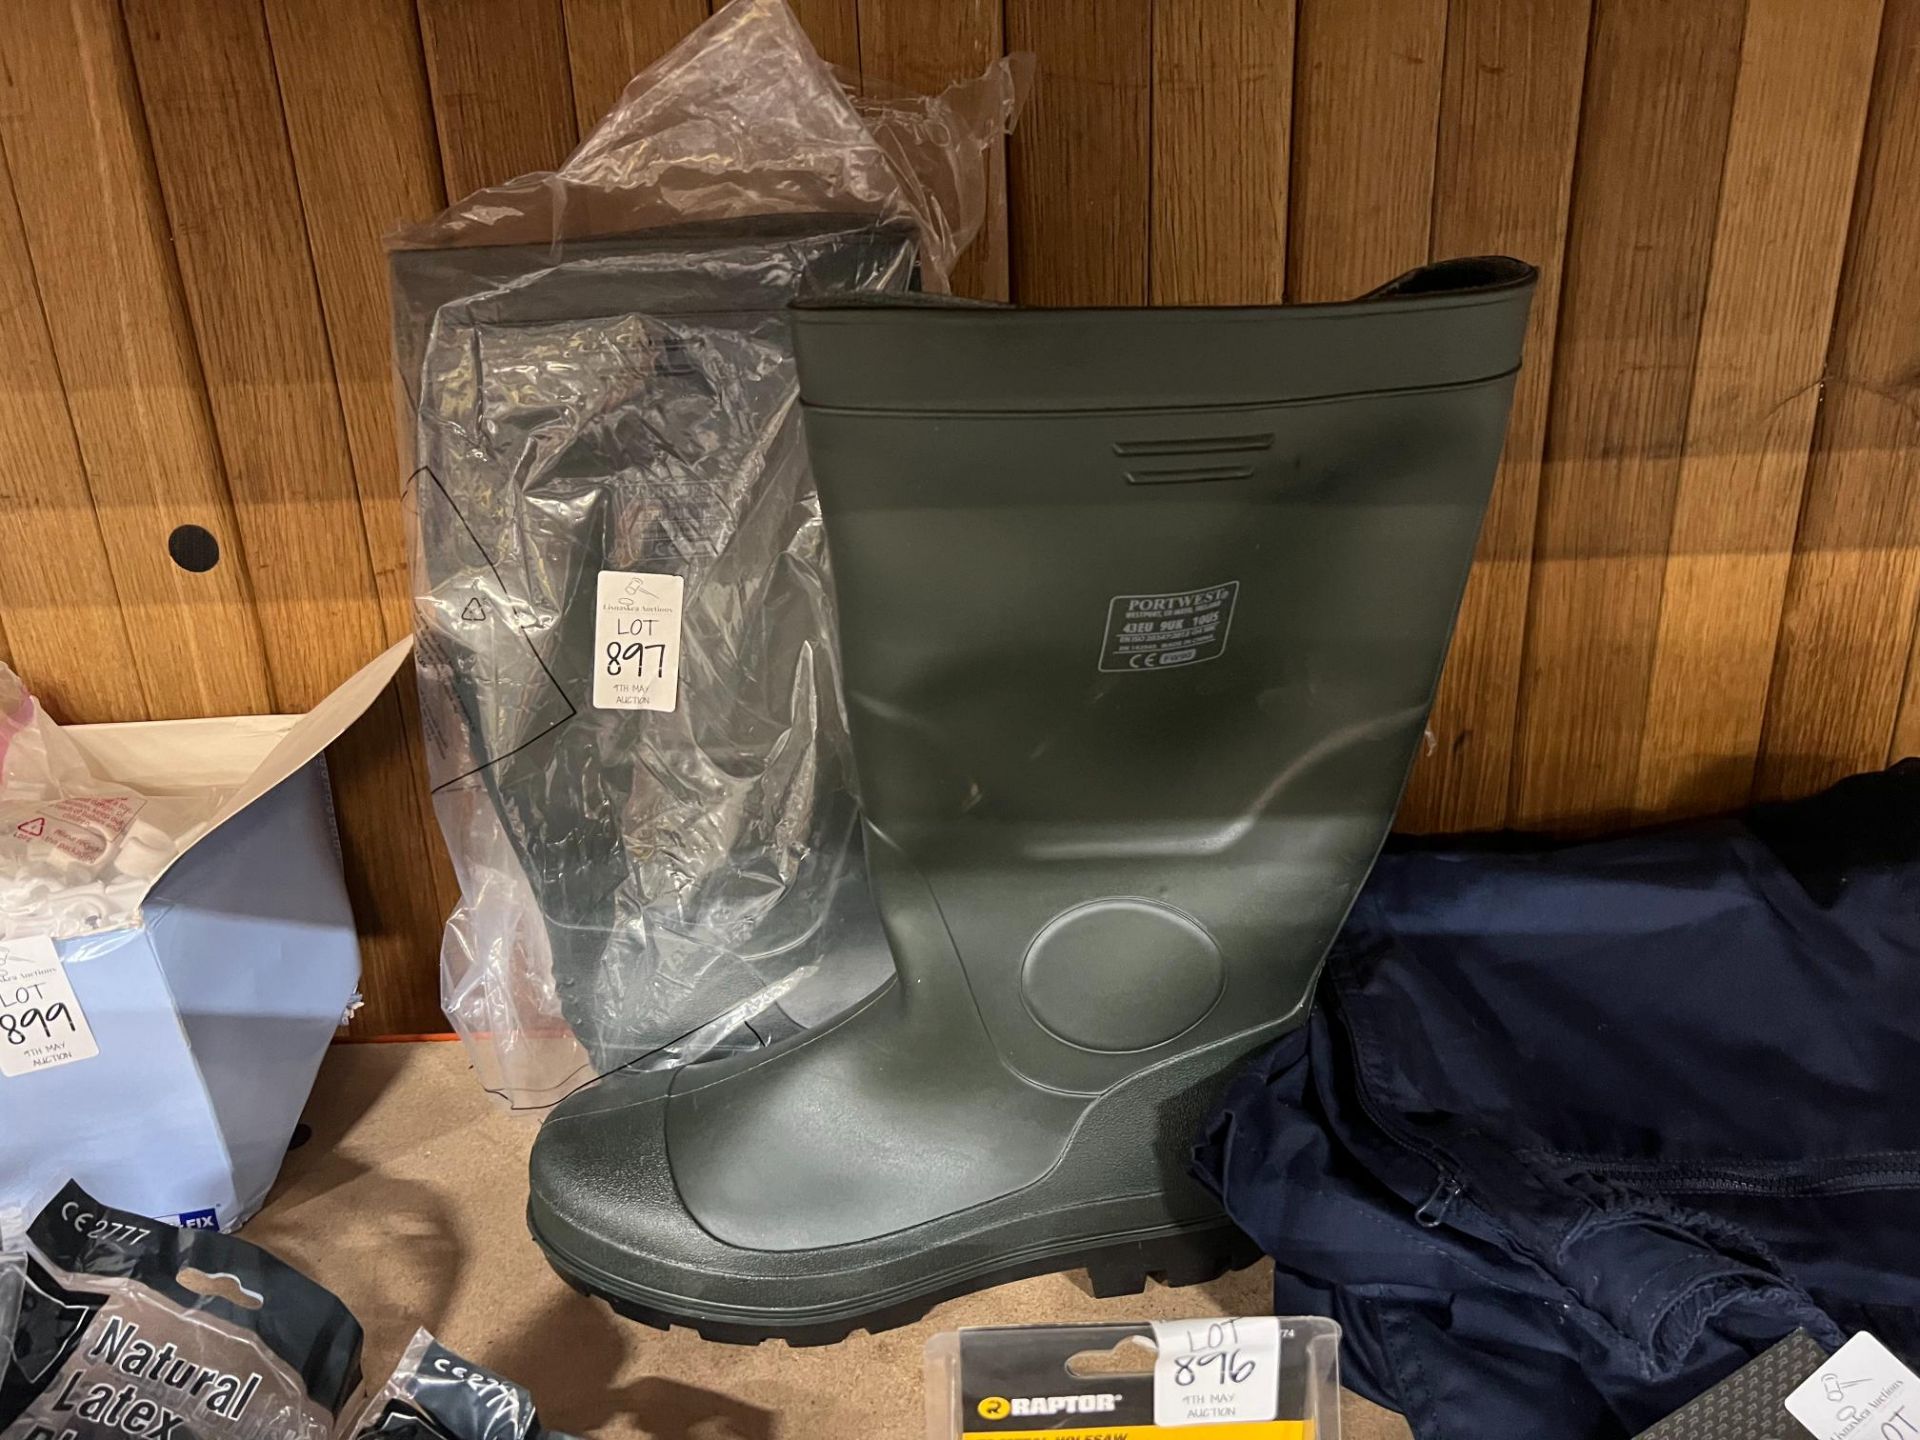 PAIR OF PORTWESTGREEN WELLIES SIZE 43/UK9 (NEW)